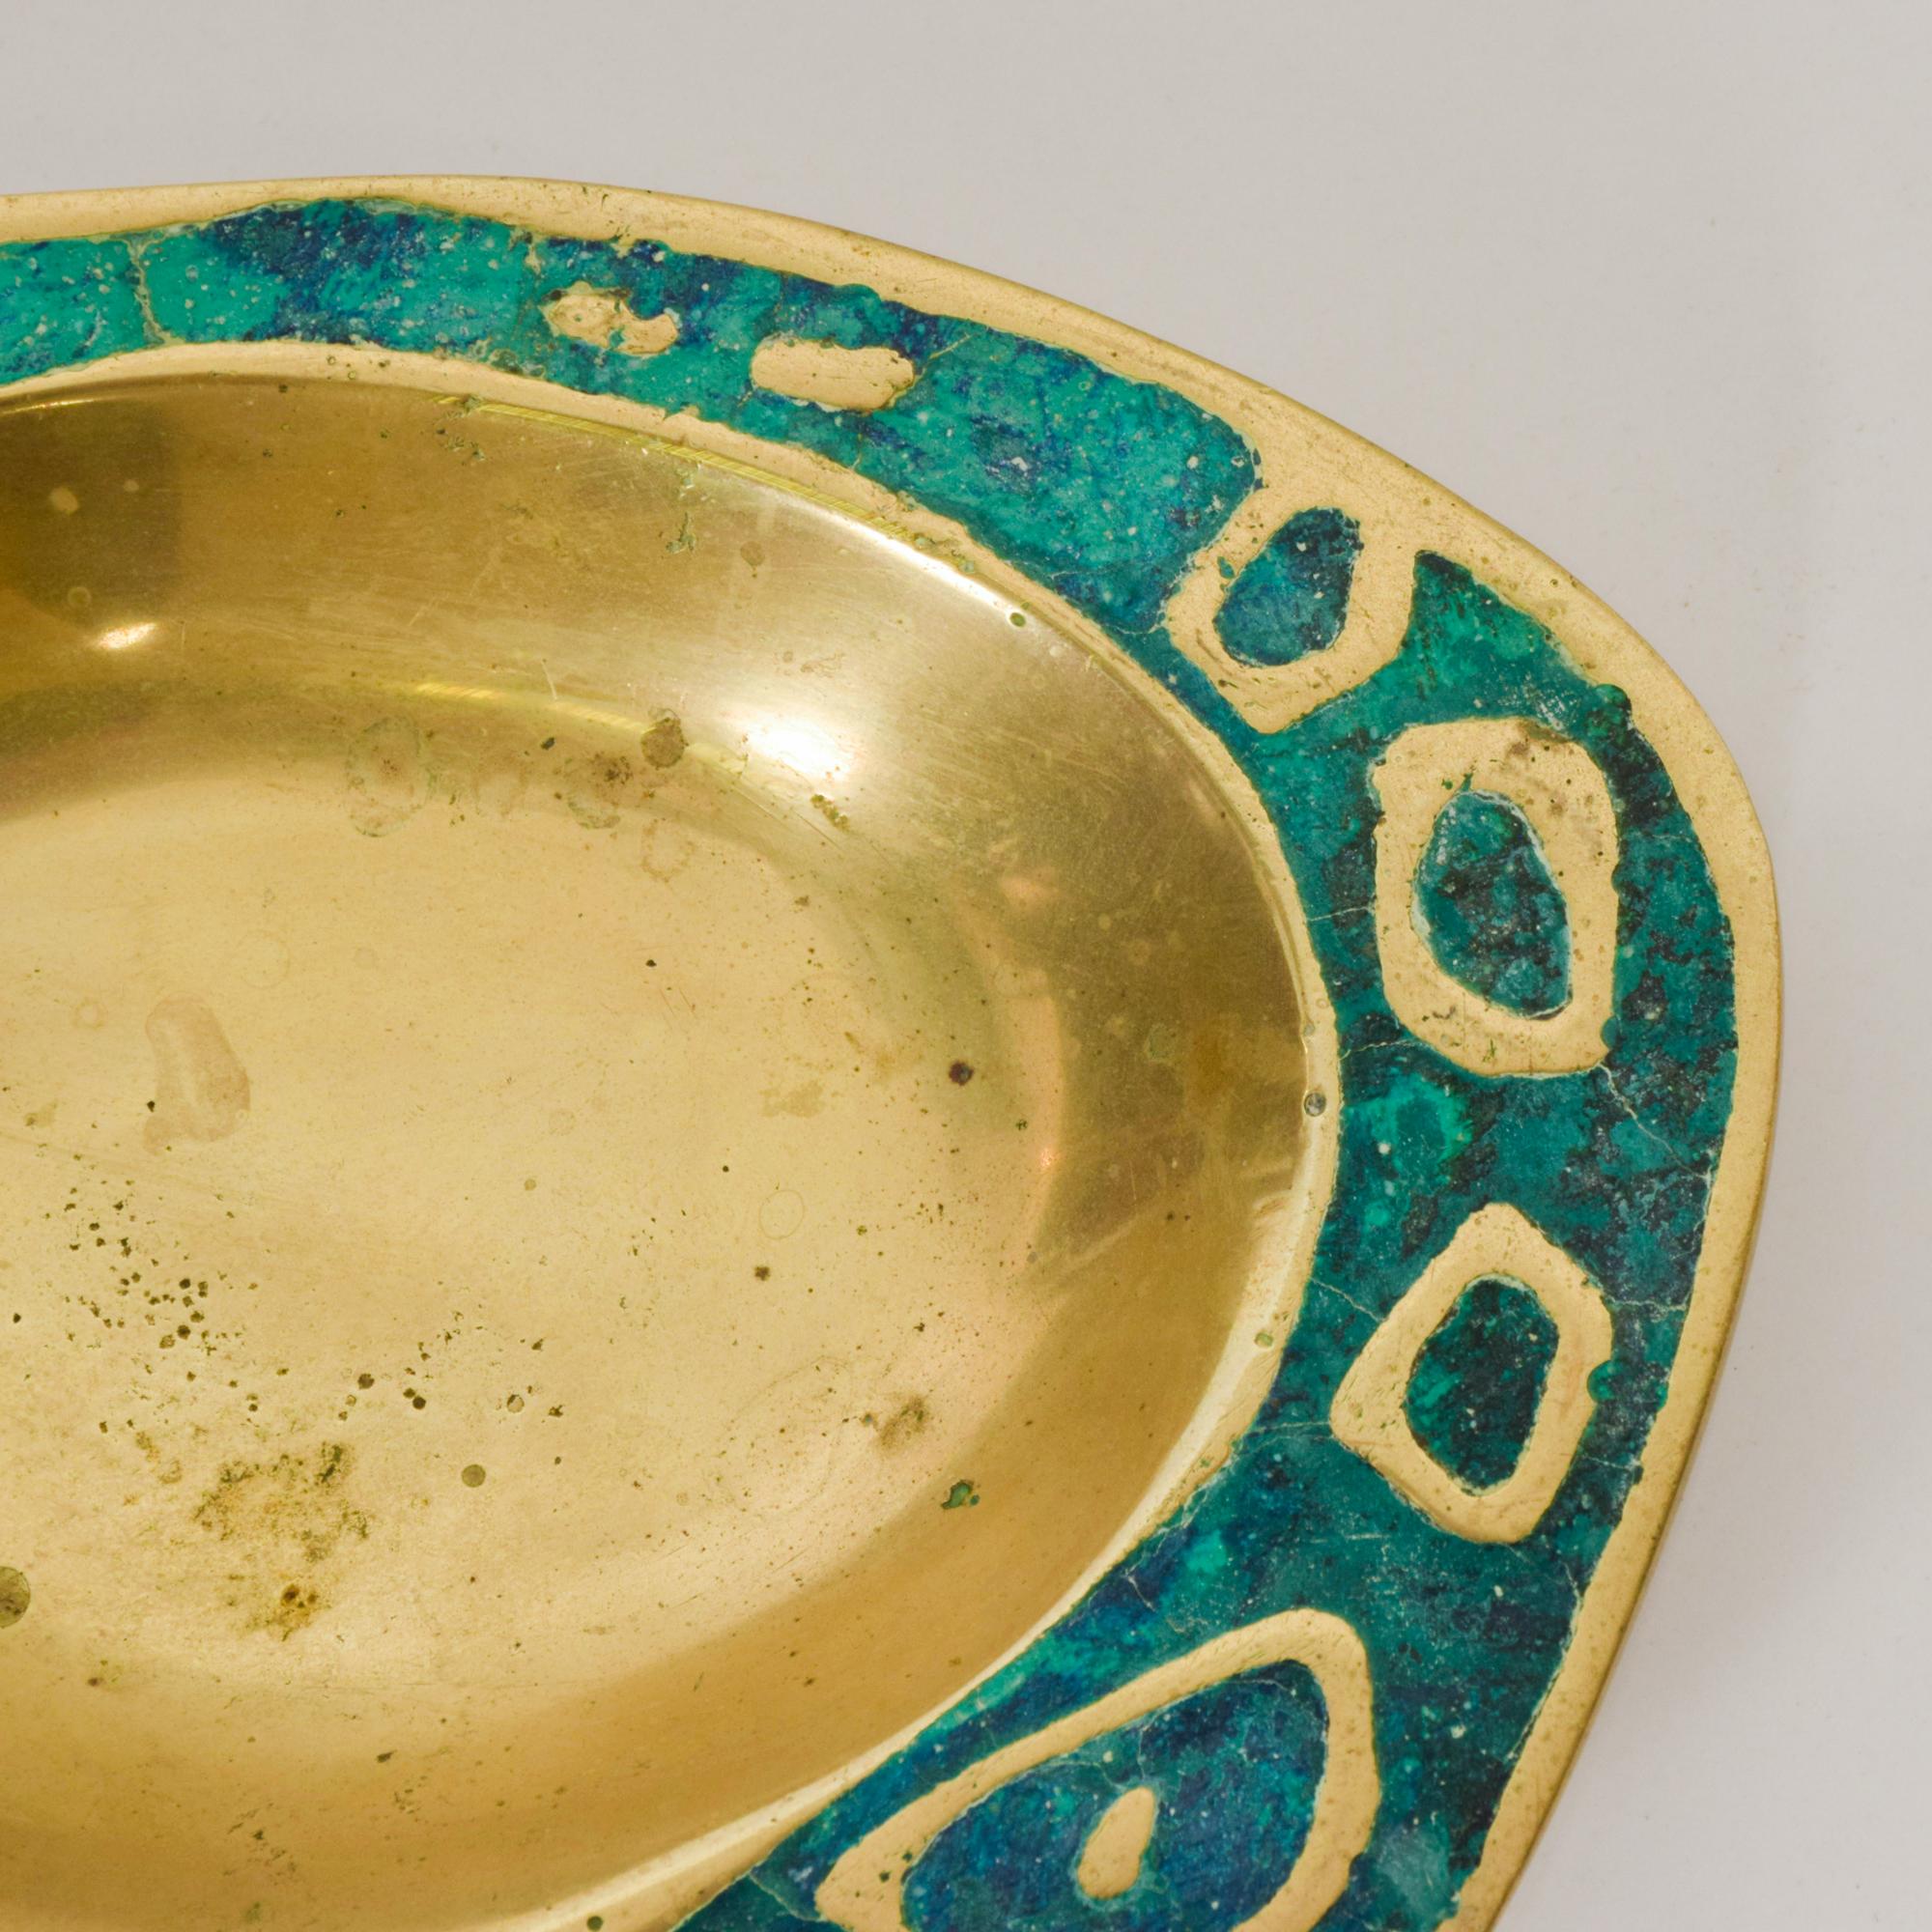 Mexican 1958 Pepe Mendoza Spectacular Turquoise and Brass Gold Dish Midcentury Modernism